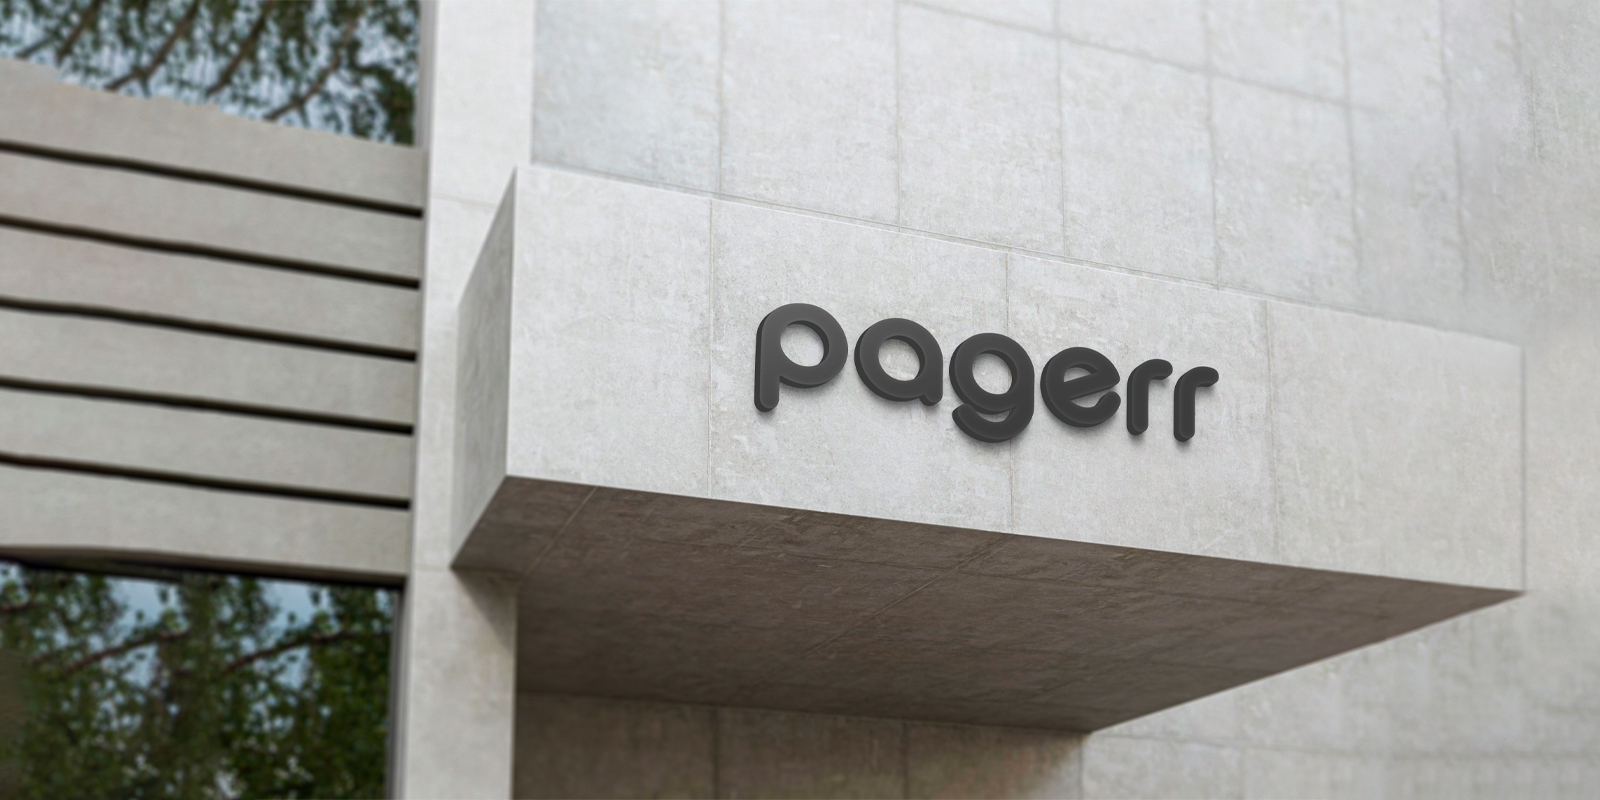 Logo signs in Adelaide - Print with Pagerr